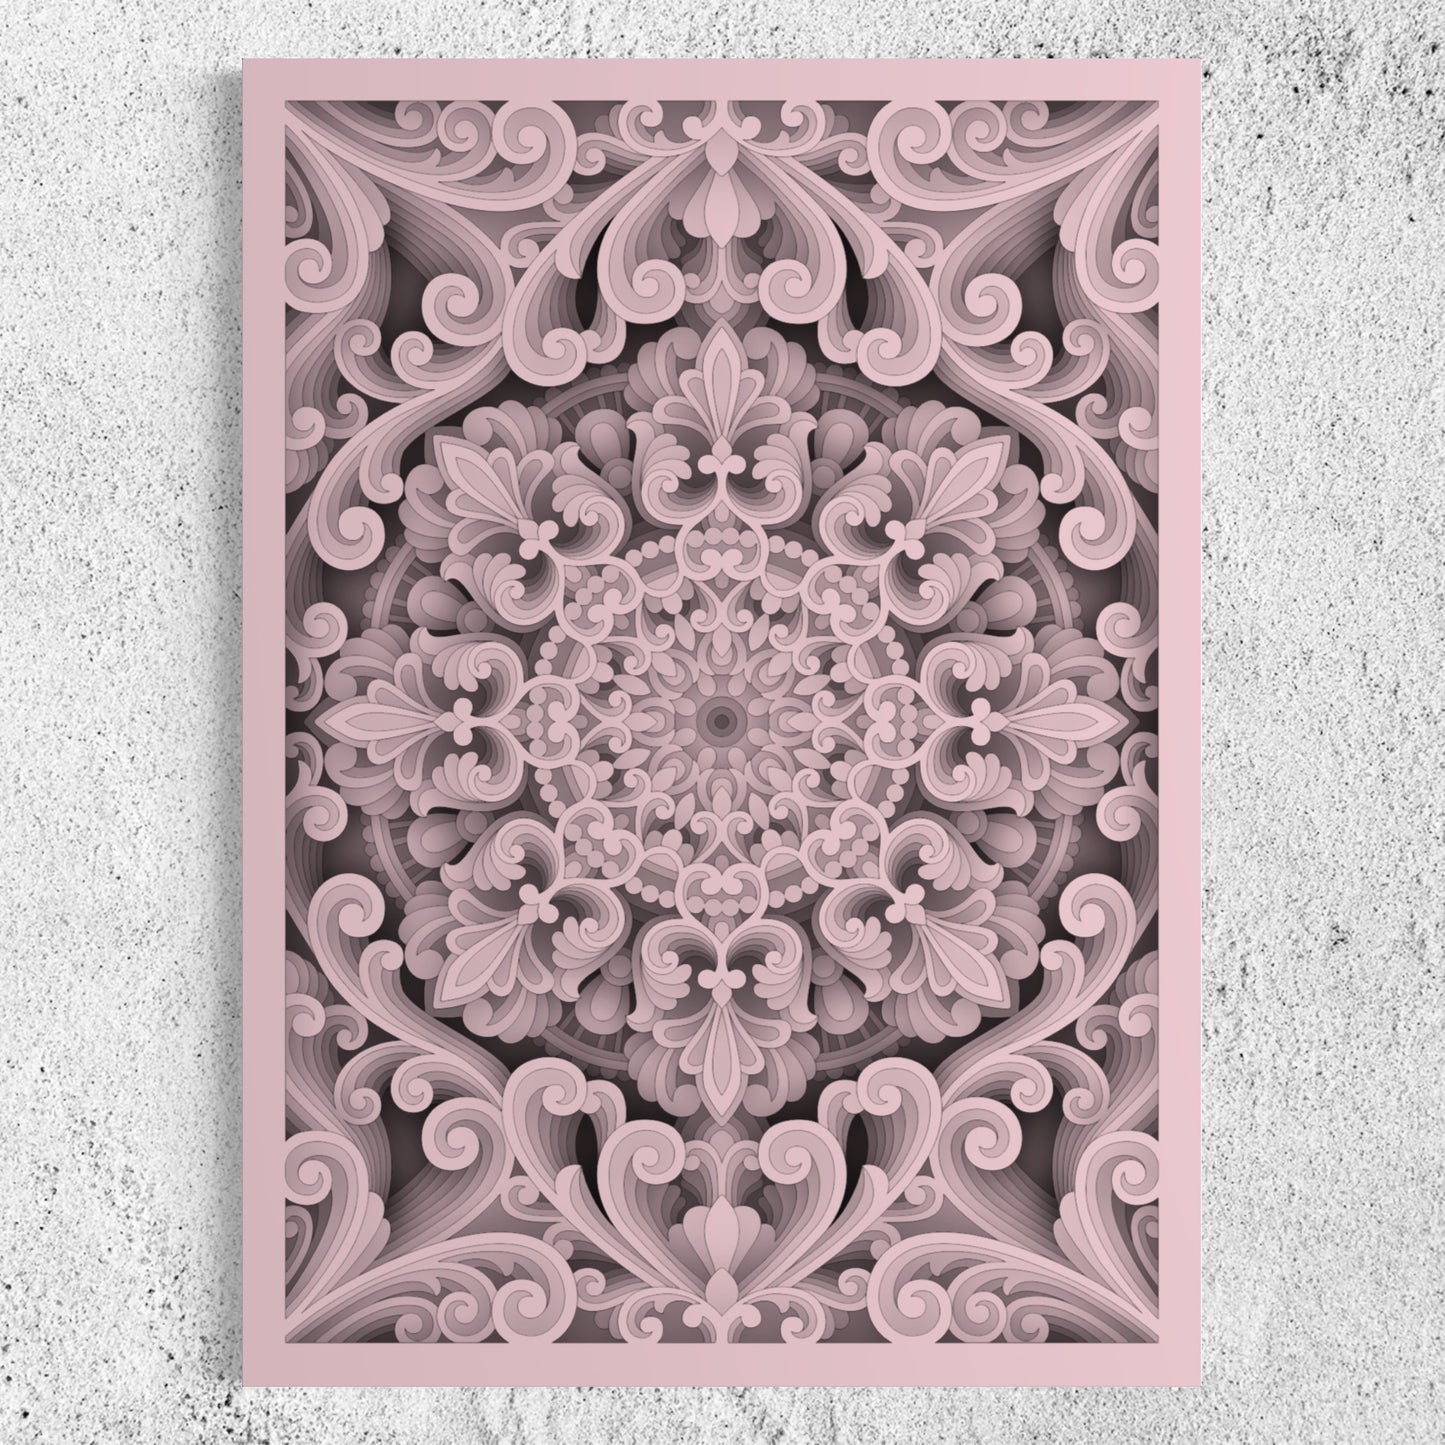 Nebula Wooden Wall Art | 22 x 30 Inch | Color Oyster Pink